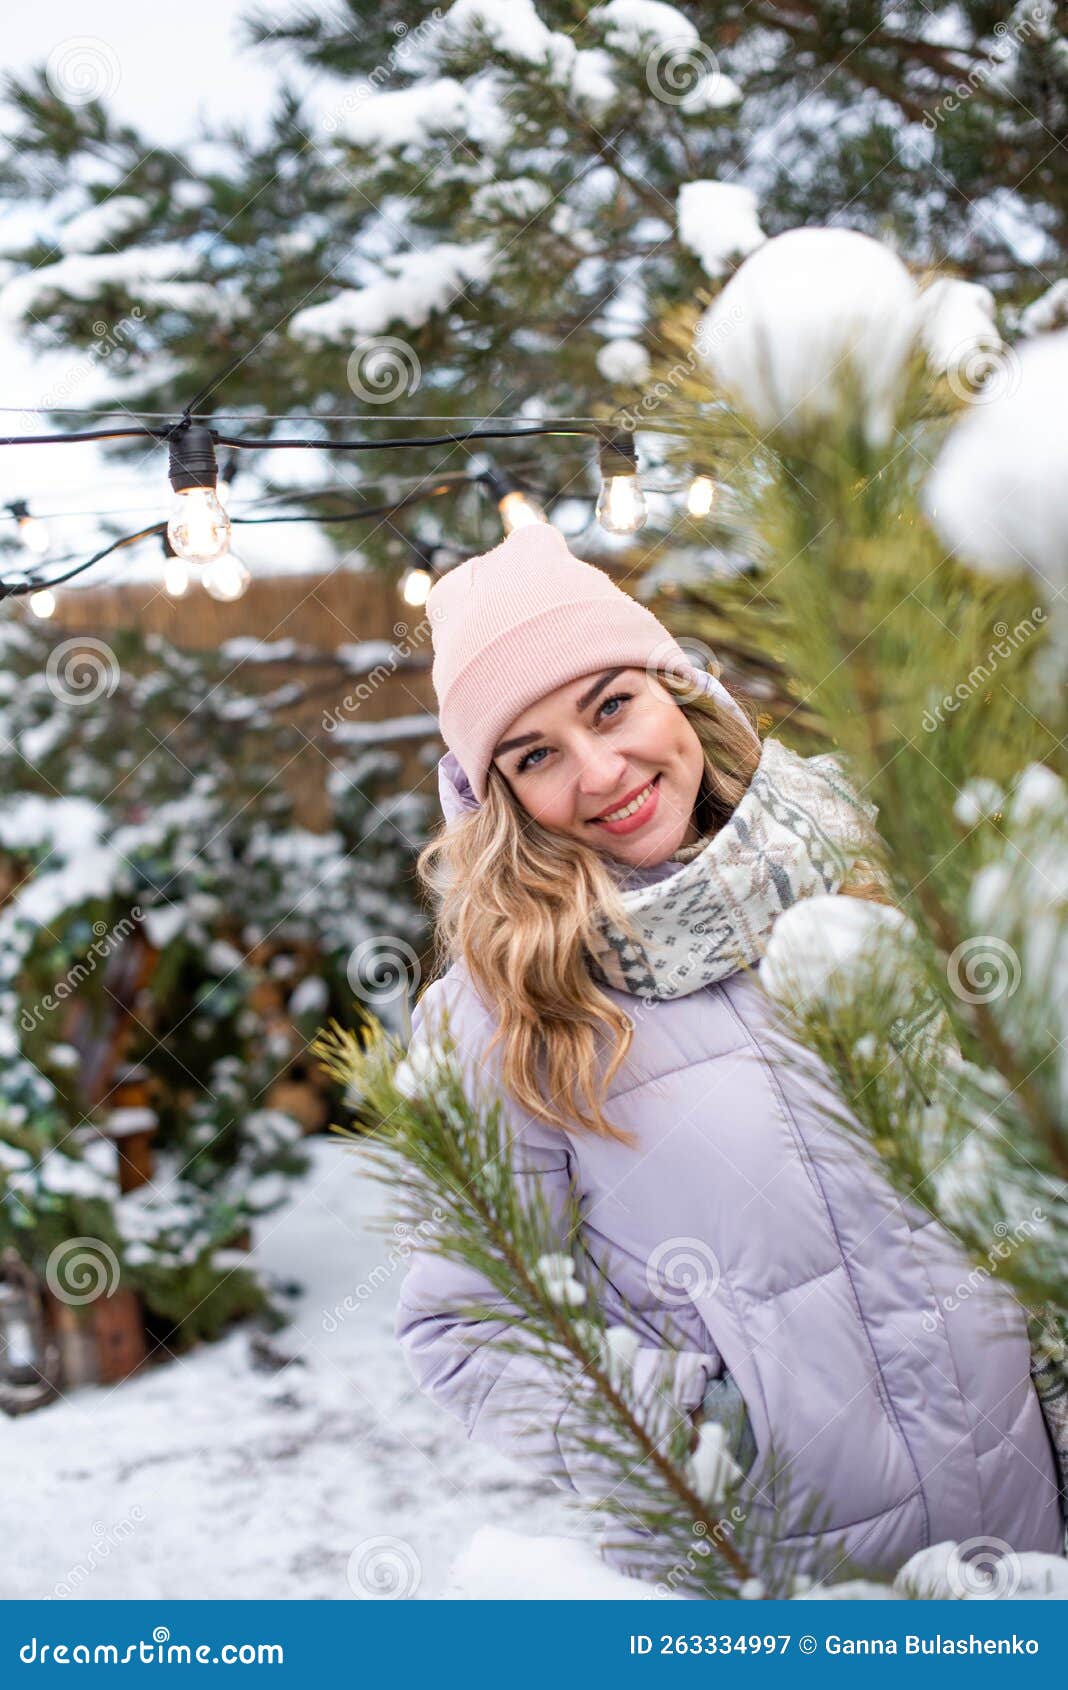 Portrait of a Young Pretty Girl among Pine Trees Stock Image - Image of ...